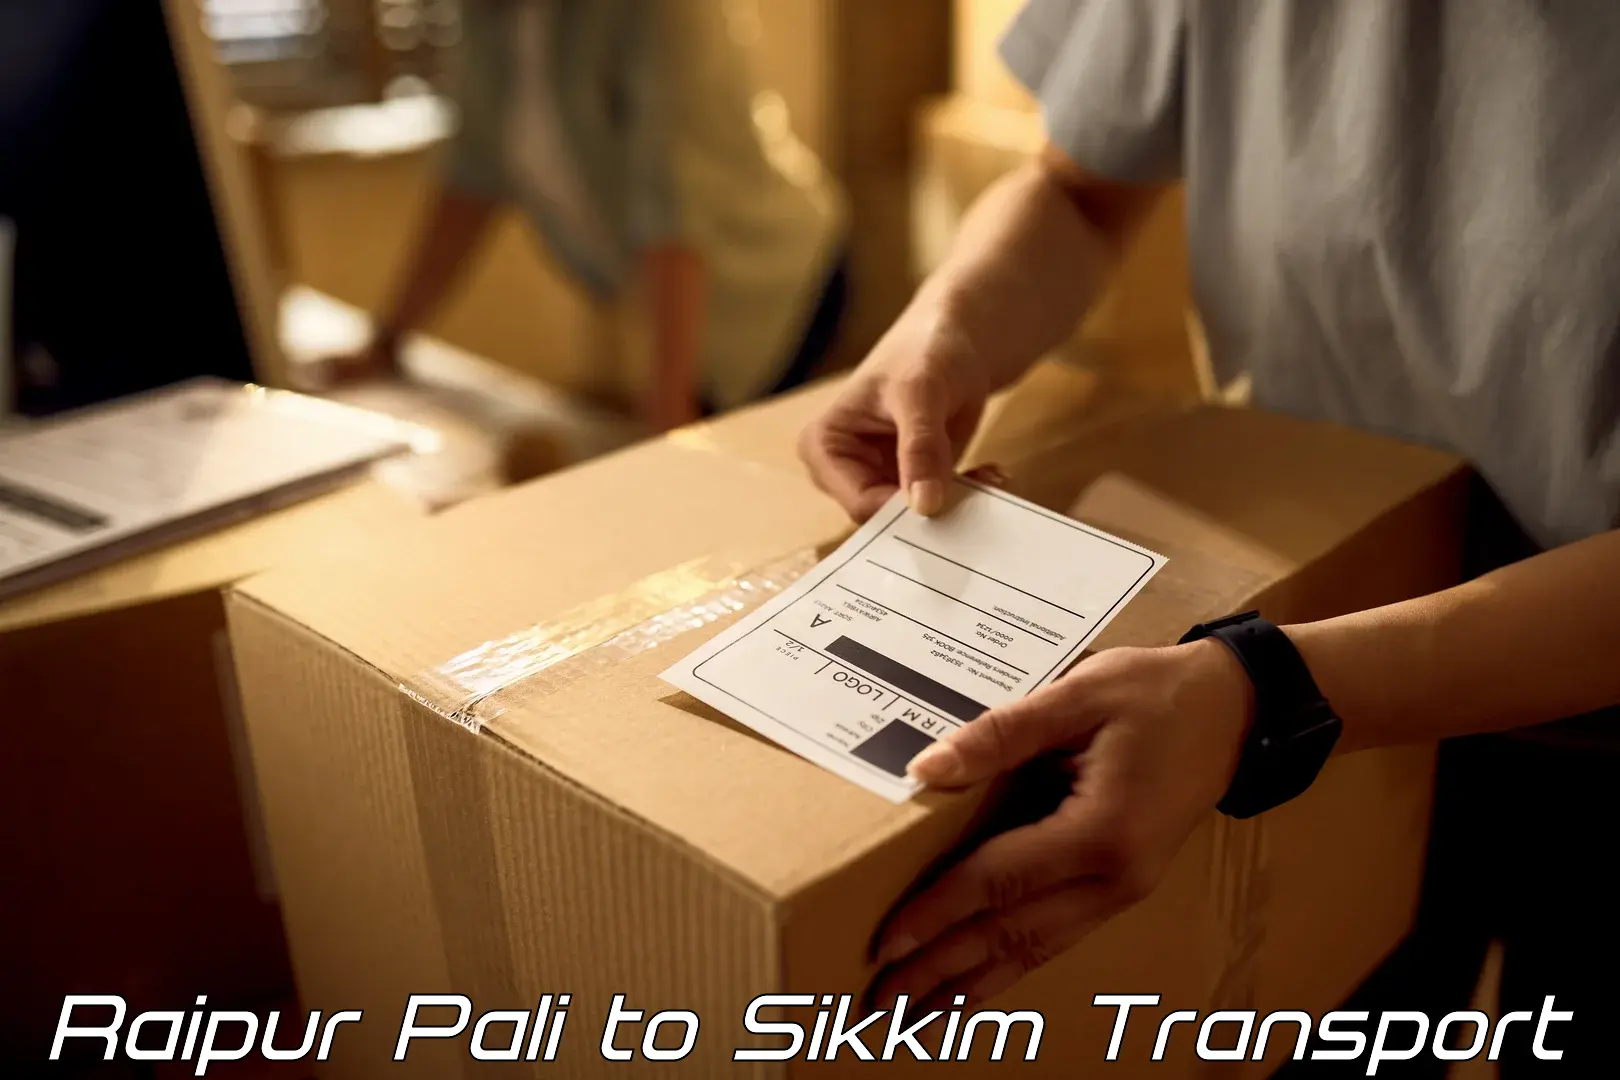 Transport shared services Raipur Pali to West Sikkim